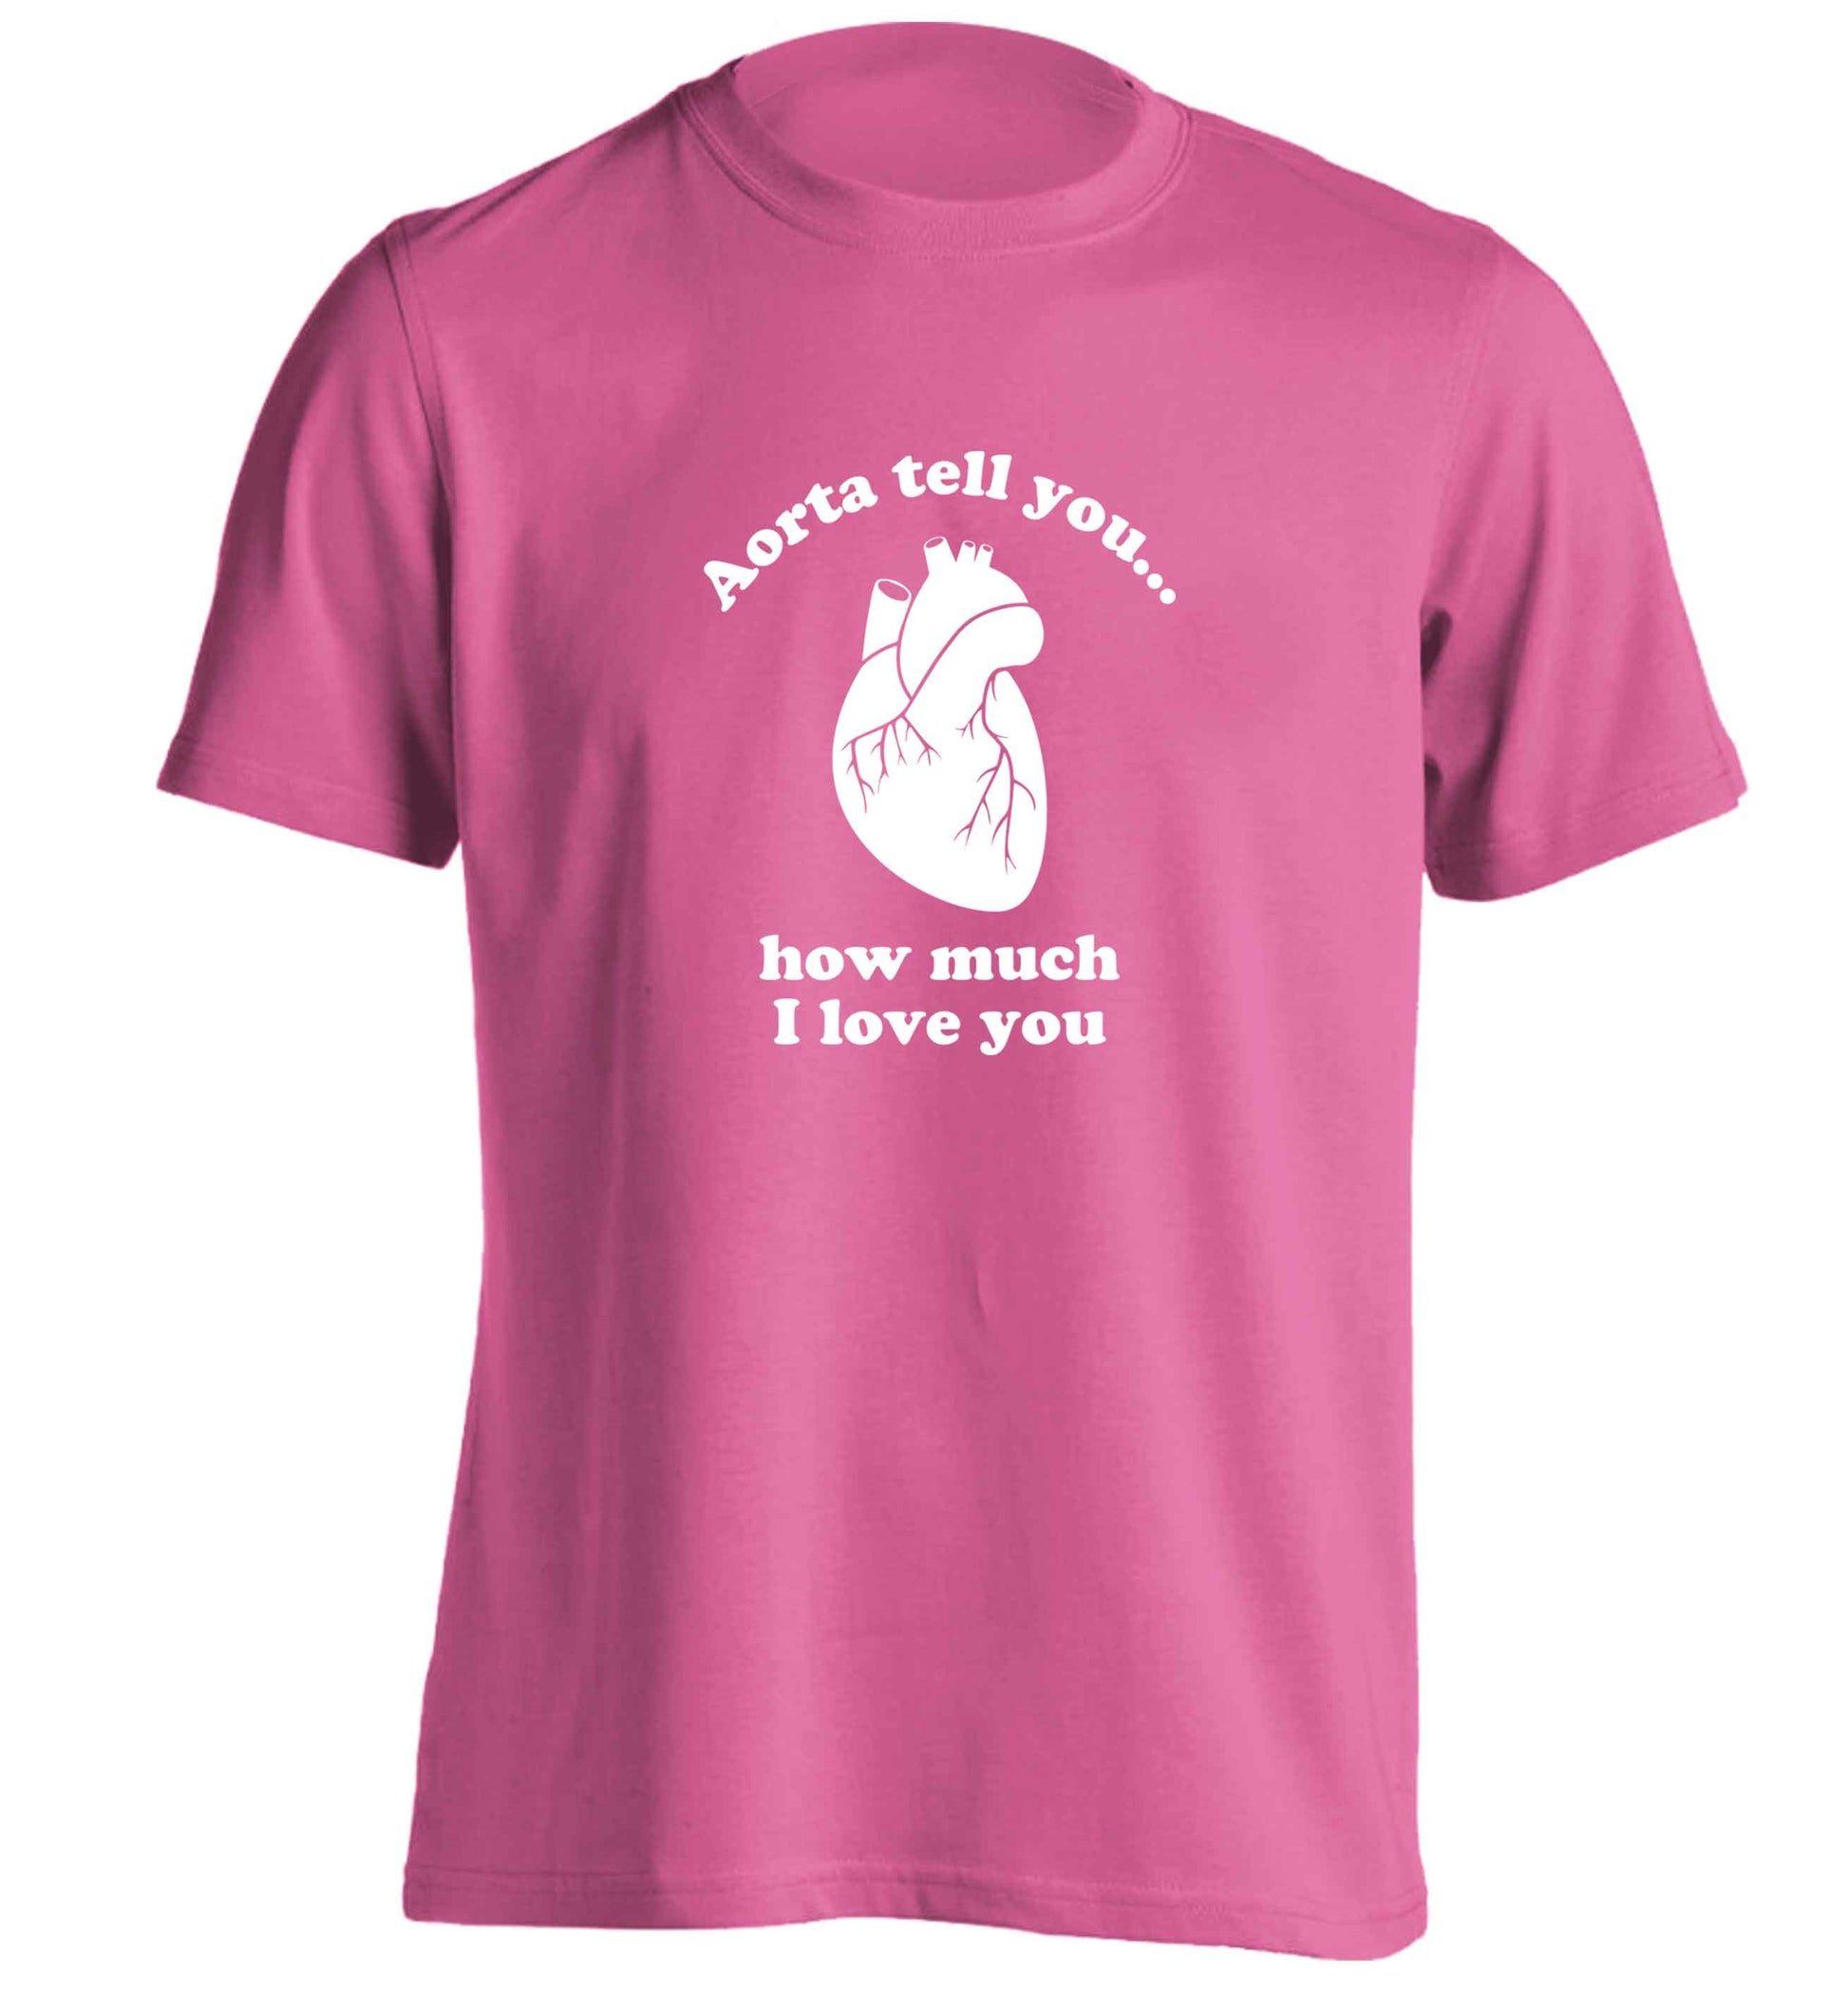 Aorta tell you how much I love you adults unisex pink Tshirt 2XL